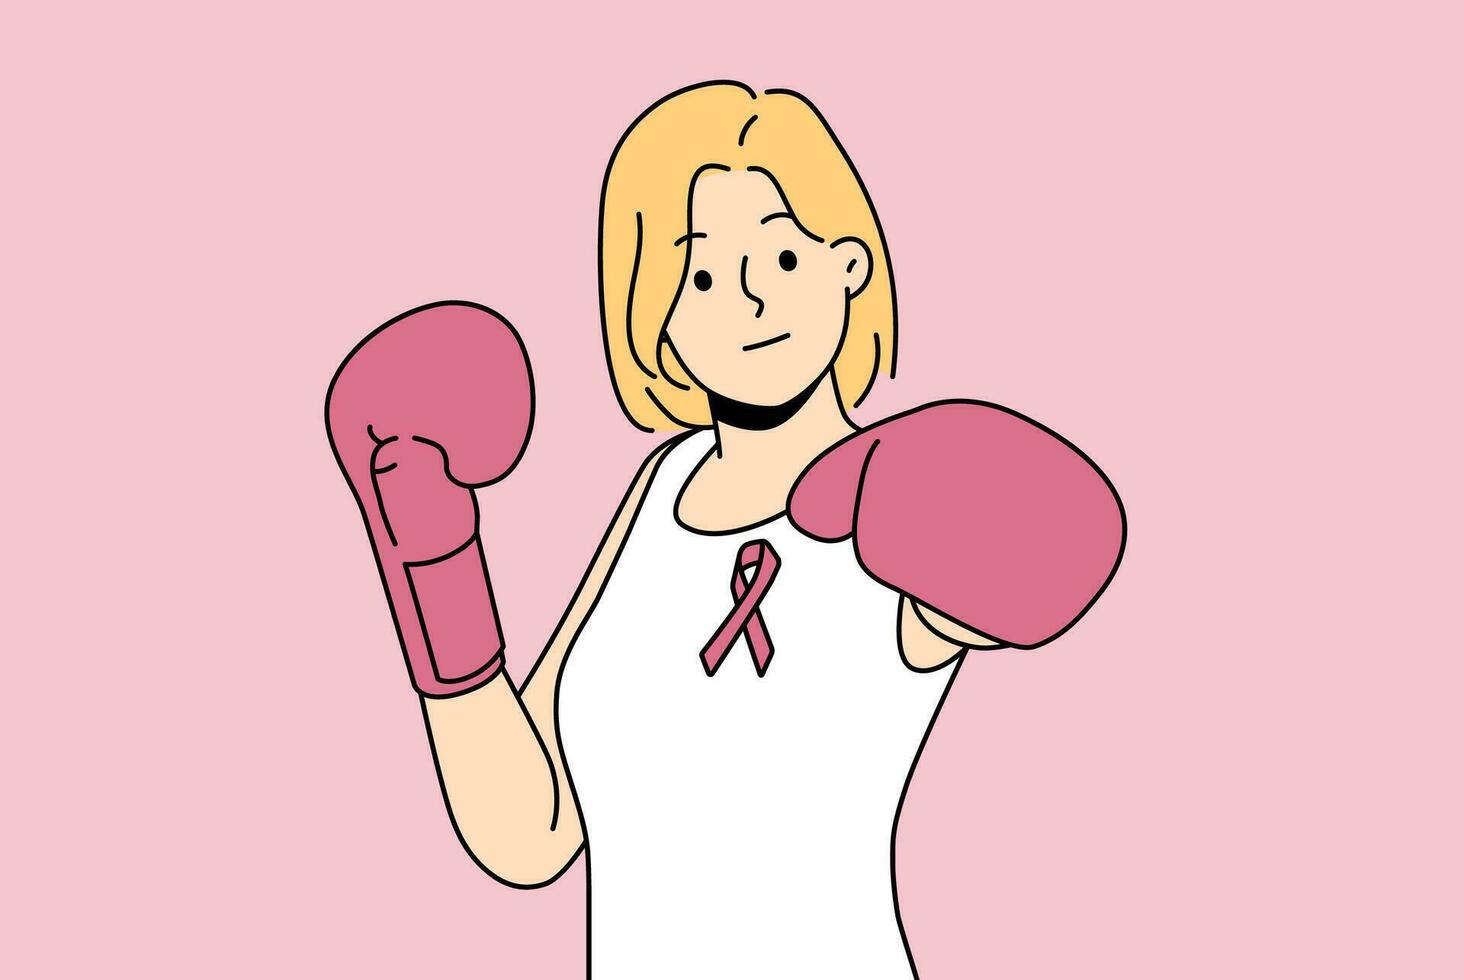 Woman fights cancerous tumor using boxing gloves and resisting development breast cancer vector